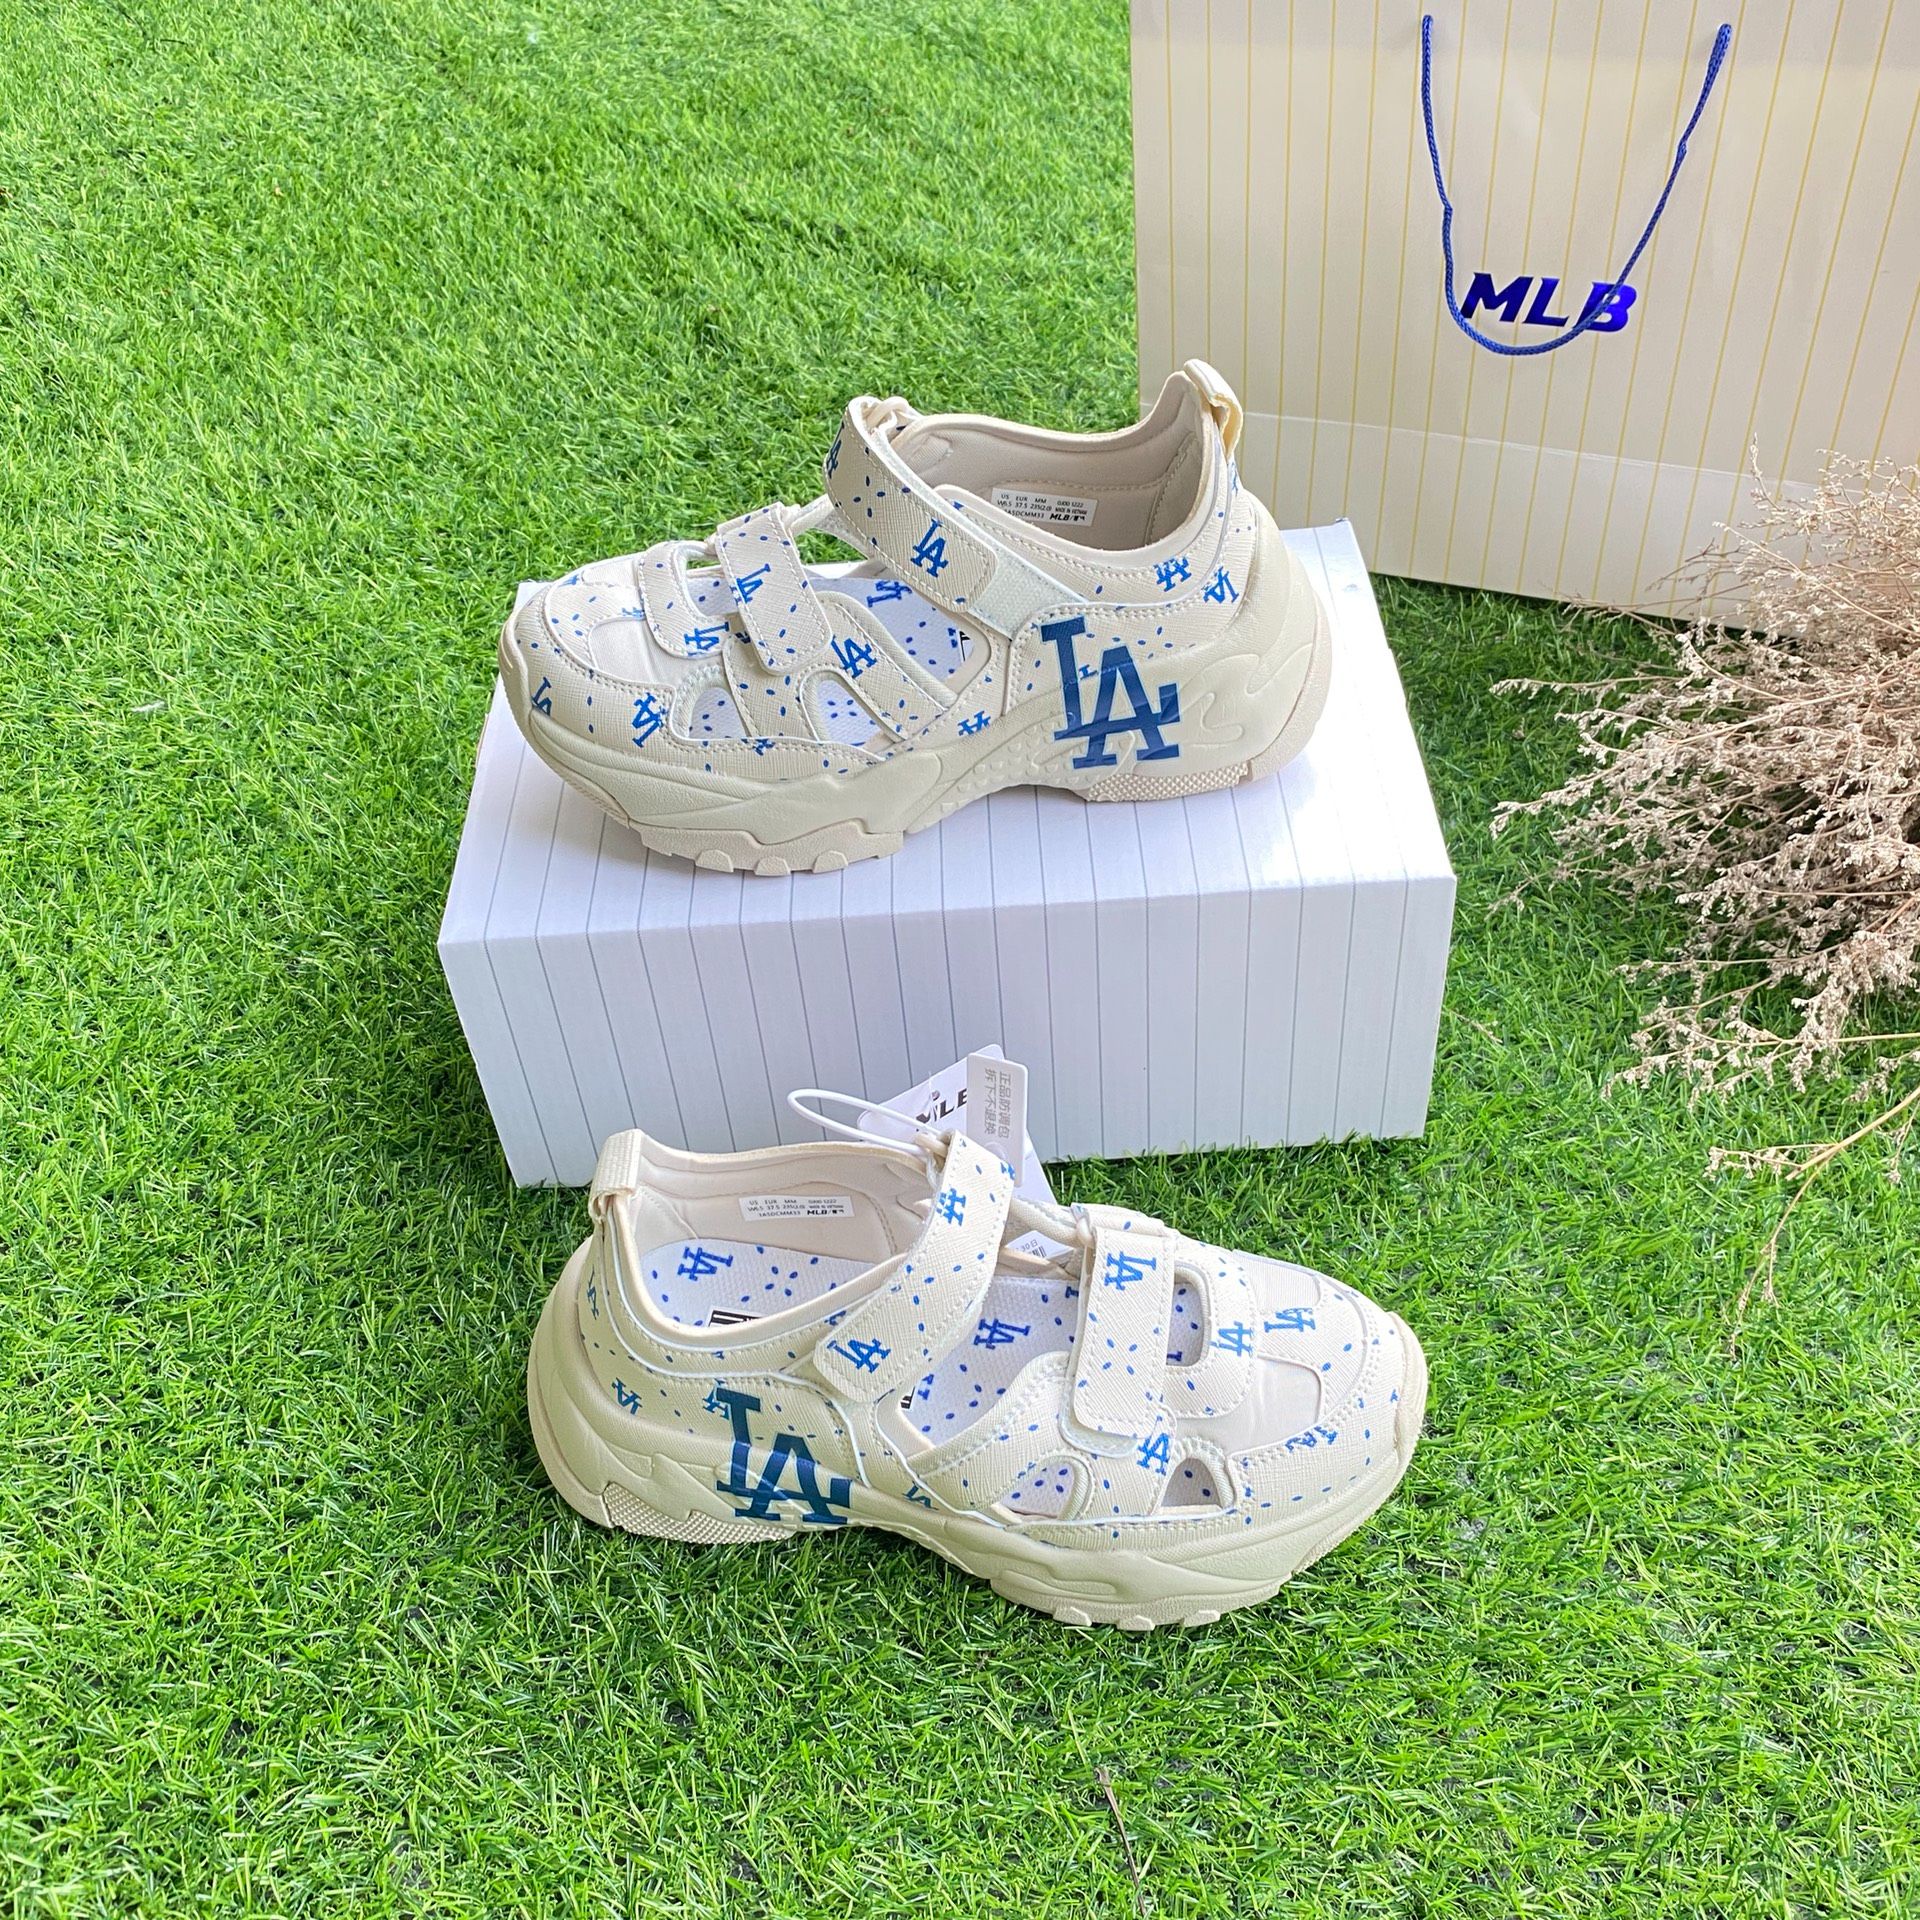 MLB LA Logo Sandals White Cream Sandals with Black Lettering Cream color  available in sizes 3643  MixASale